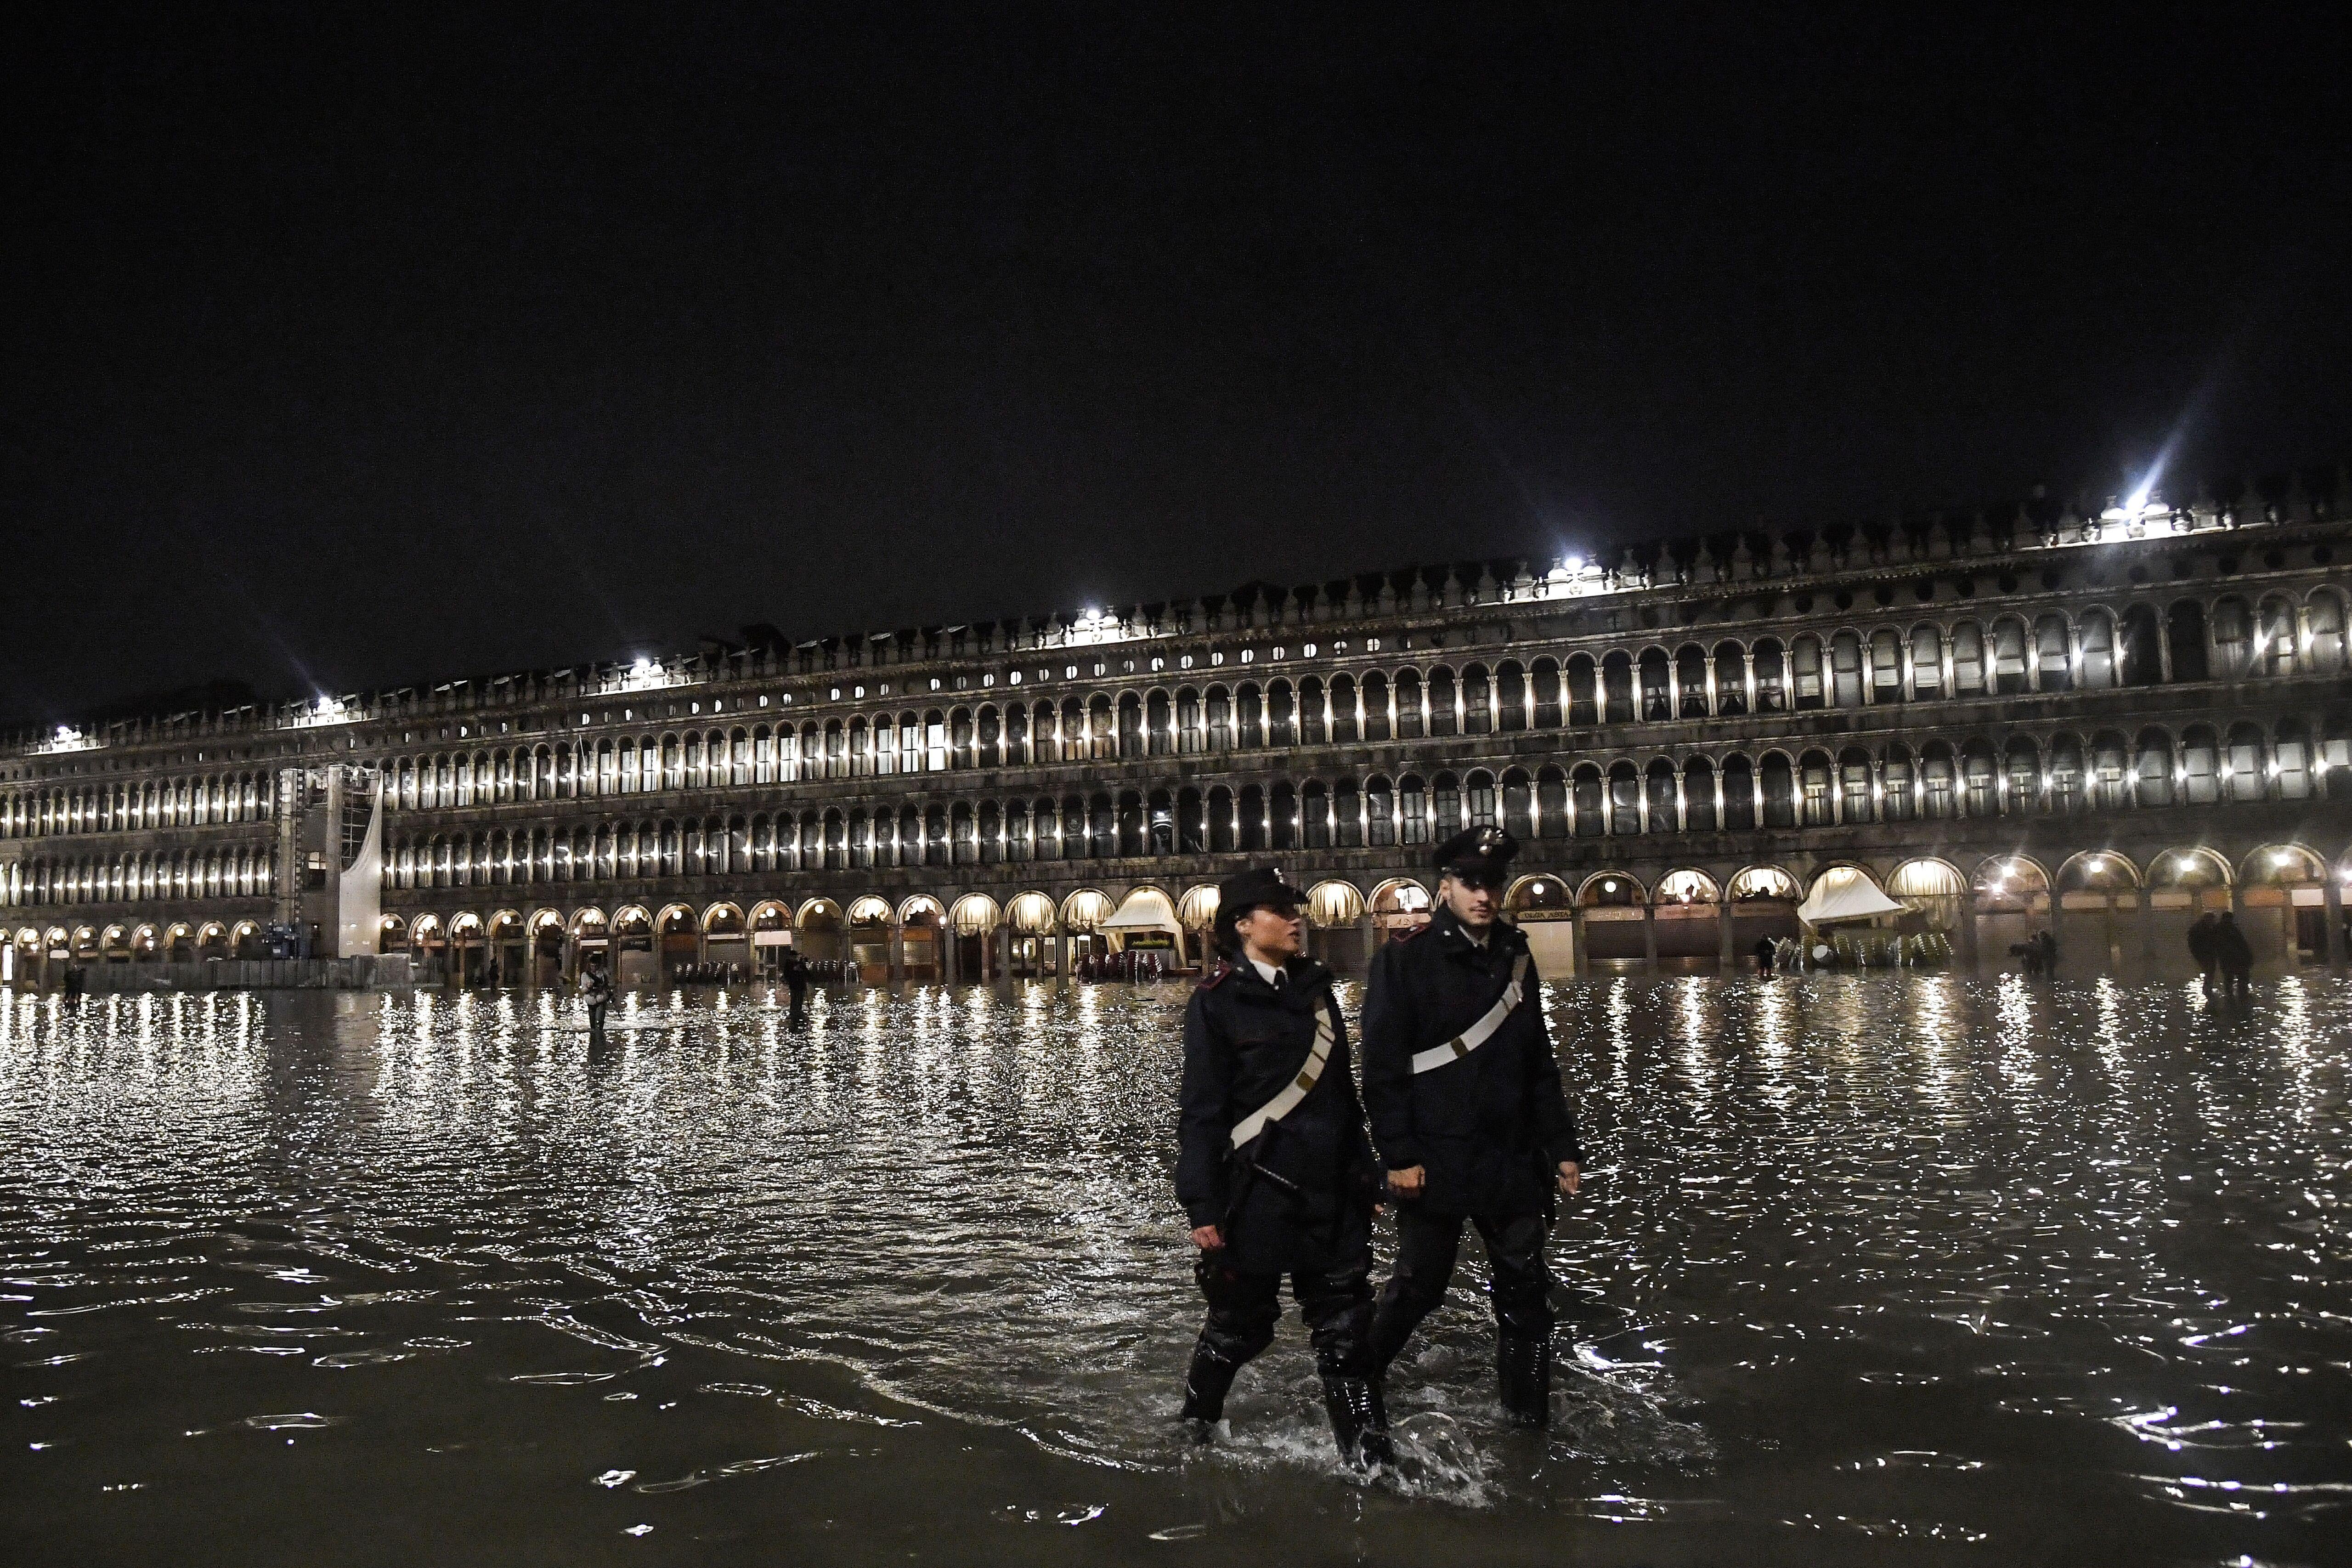 Police patrol across the flooded St. Mark’s Square.